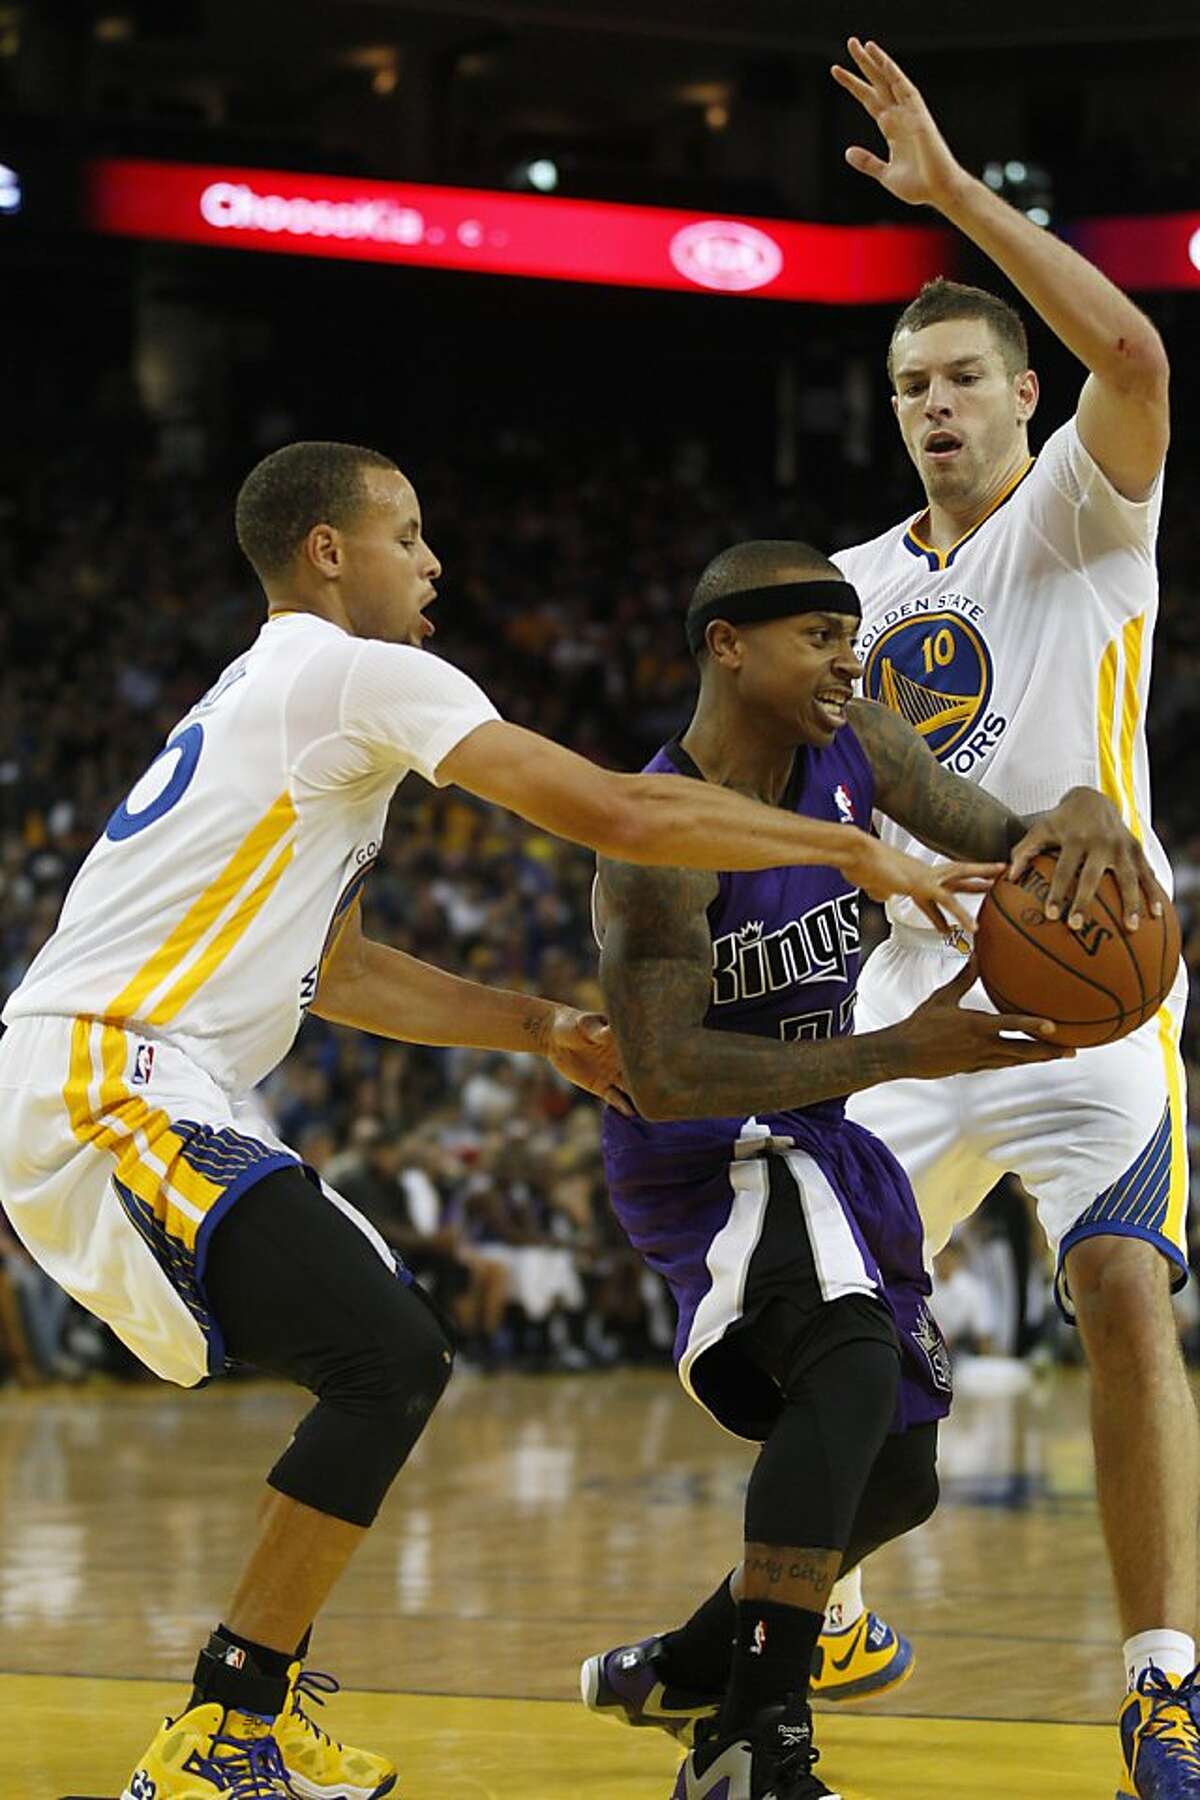 Warriors' Stephen Curry, left, and David Lee surround Kings' Isaiah Thomas November 2, 2013 during the Warriors vs. Kings game at the Oracle Arena in Oakland, Calif.